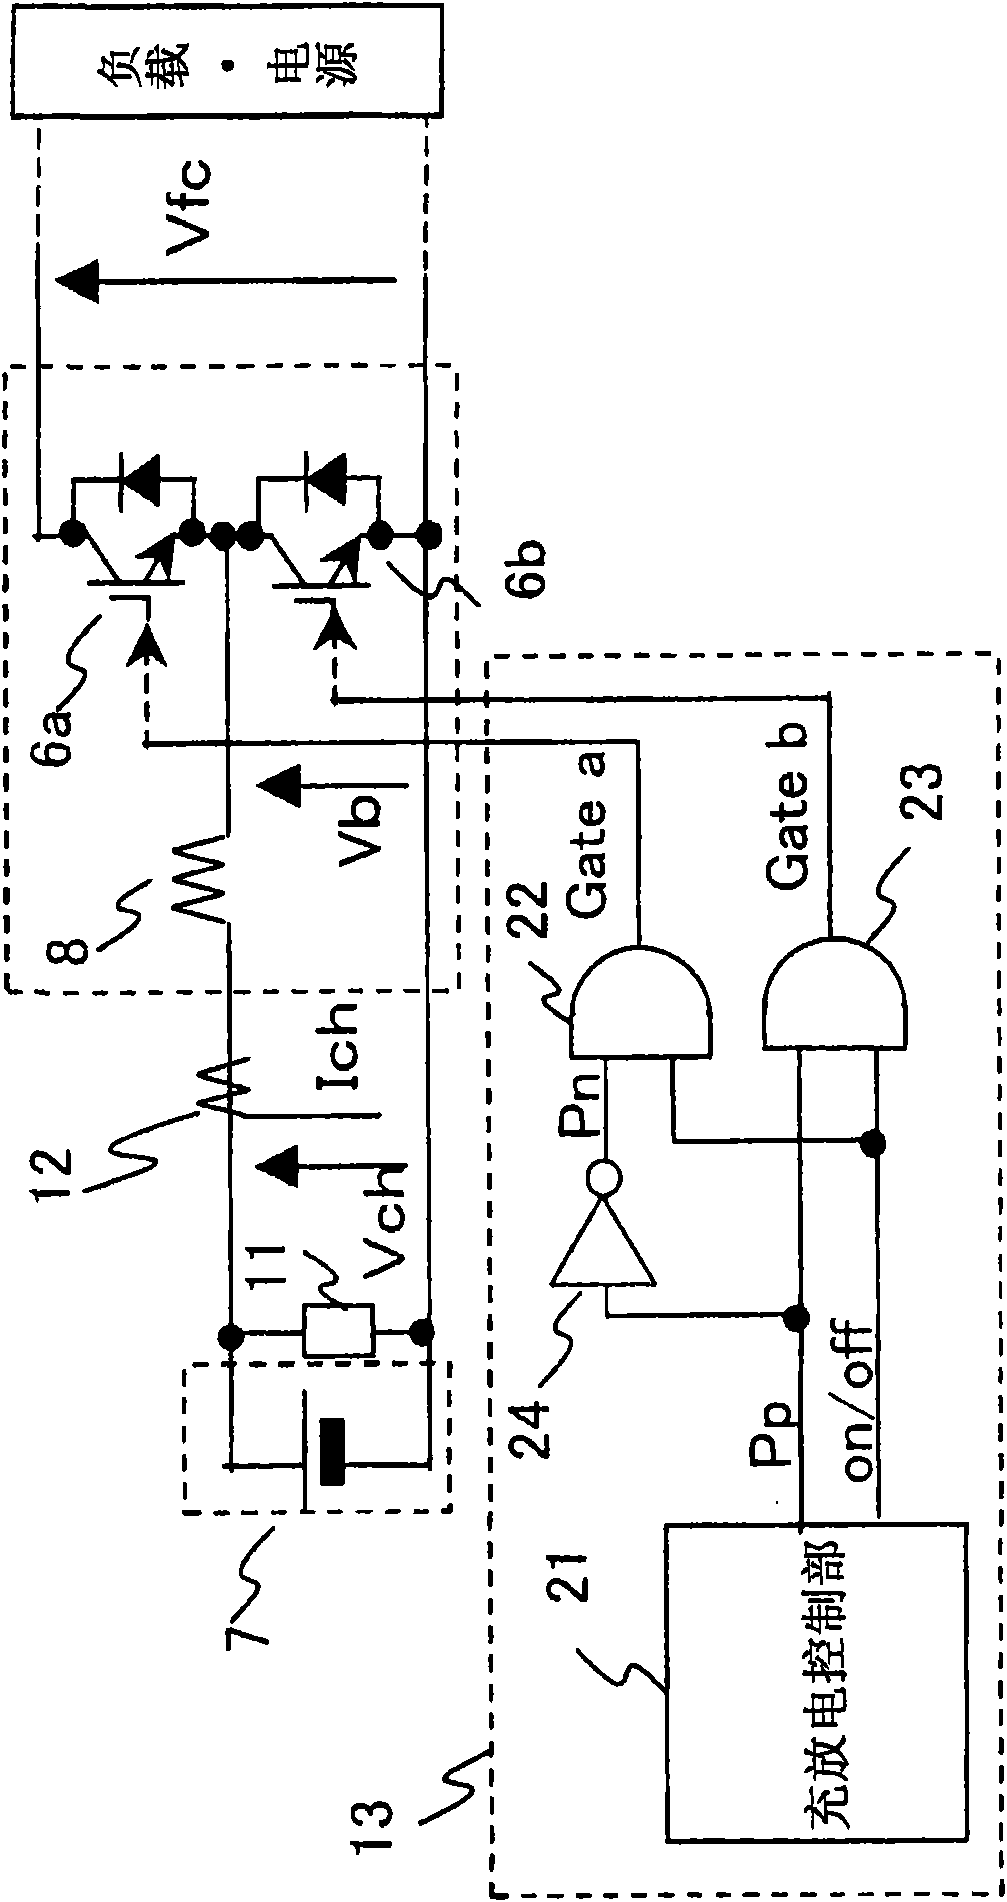 Control system for vehicle receiving power intermittently